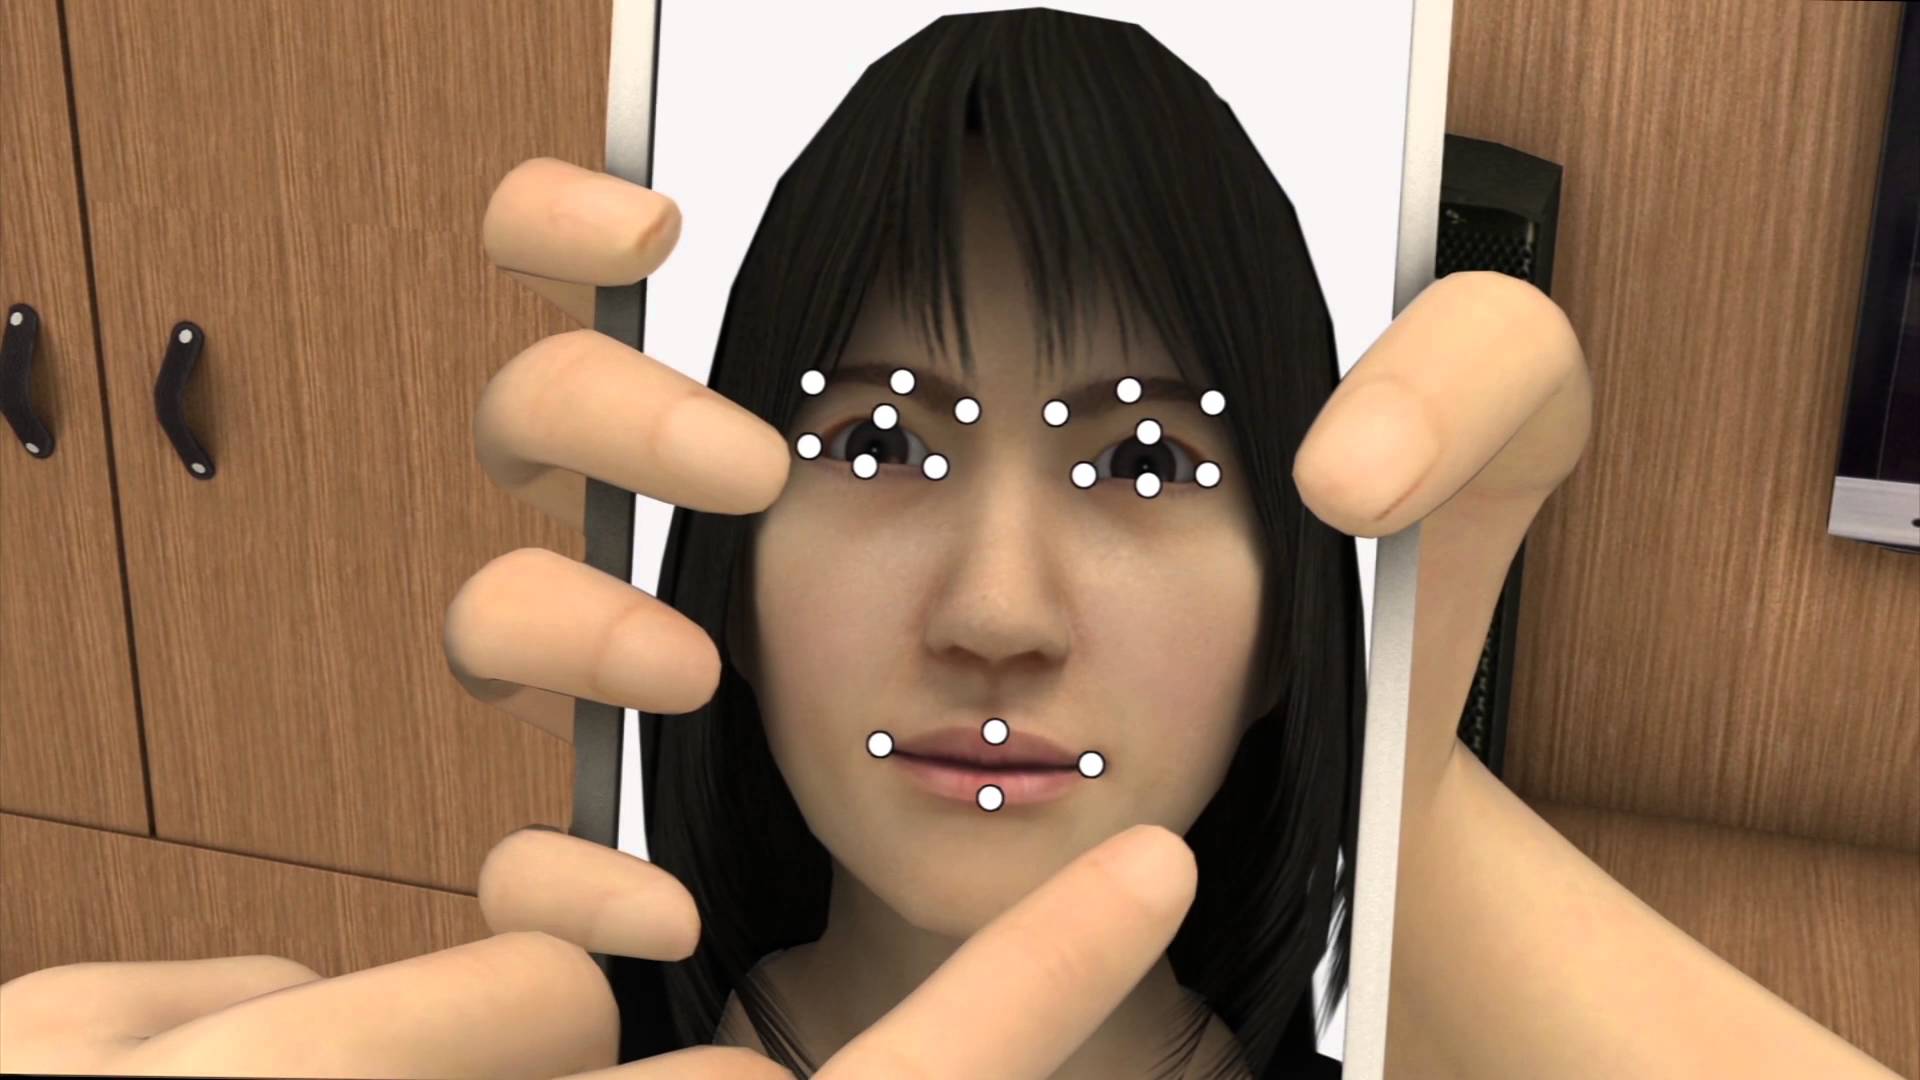 Virtual makeover phone app ModiFace Live lets users virtually apply makeup in real time